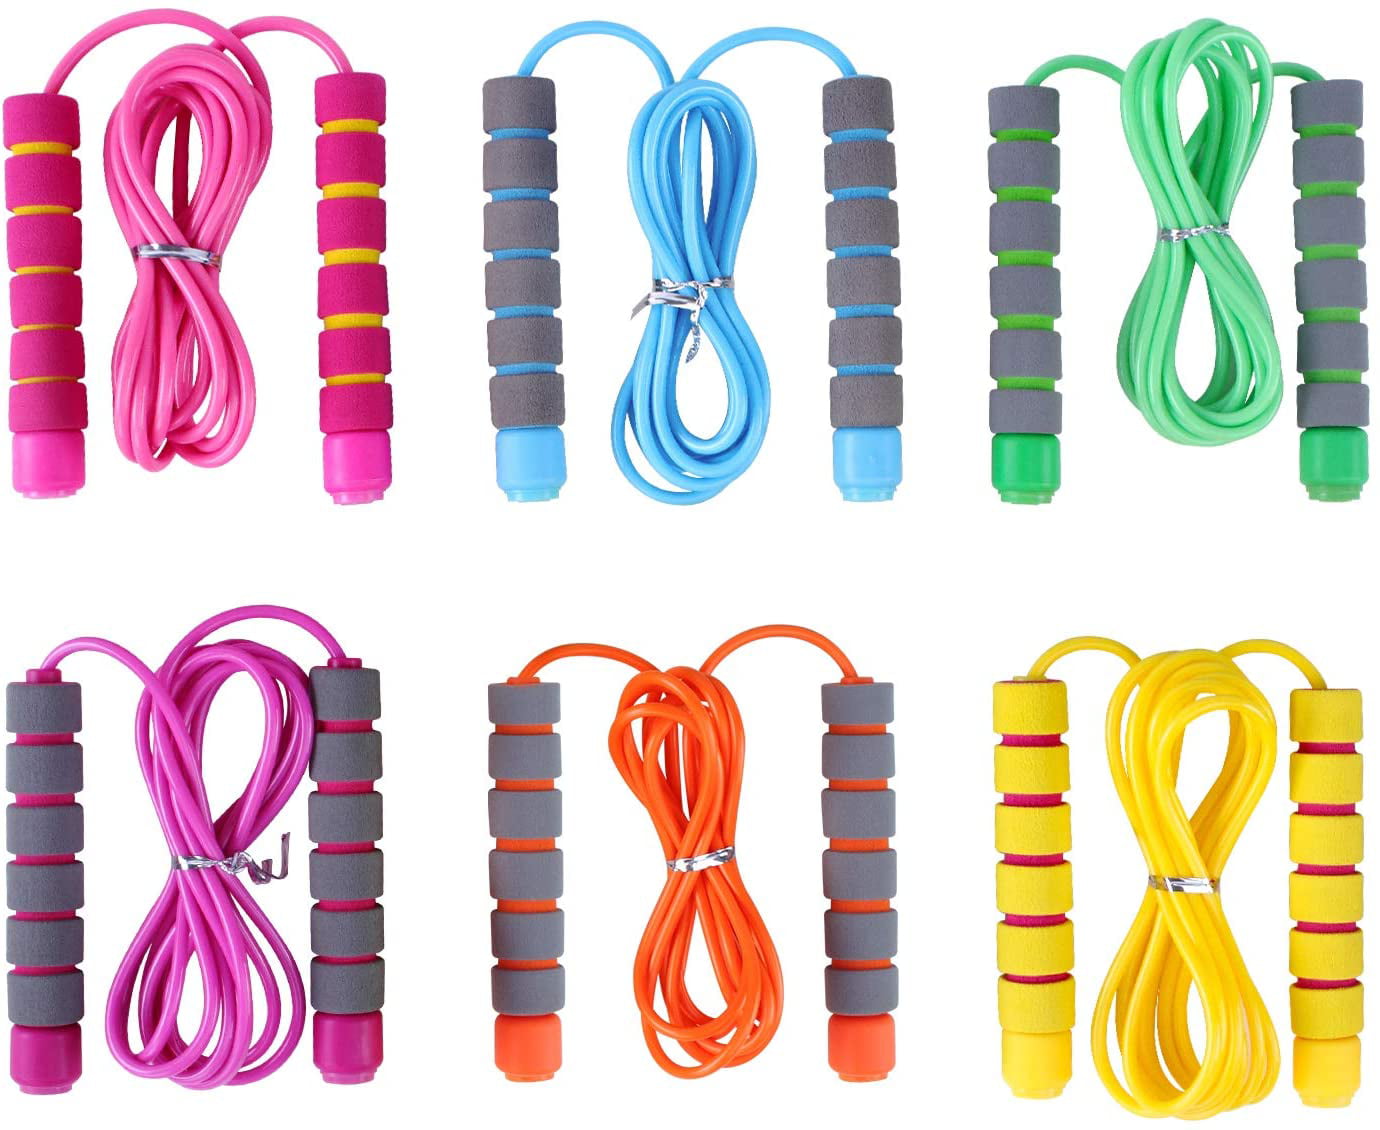 Jump Rope for Kids 6 Pack Adjustable Soft Skipping Rope Training Outdoor Activity Segmented Fitness Skipping Rope for Boys Girls 